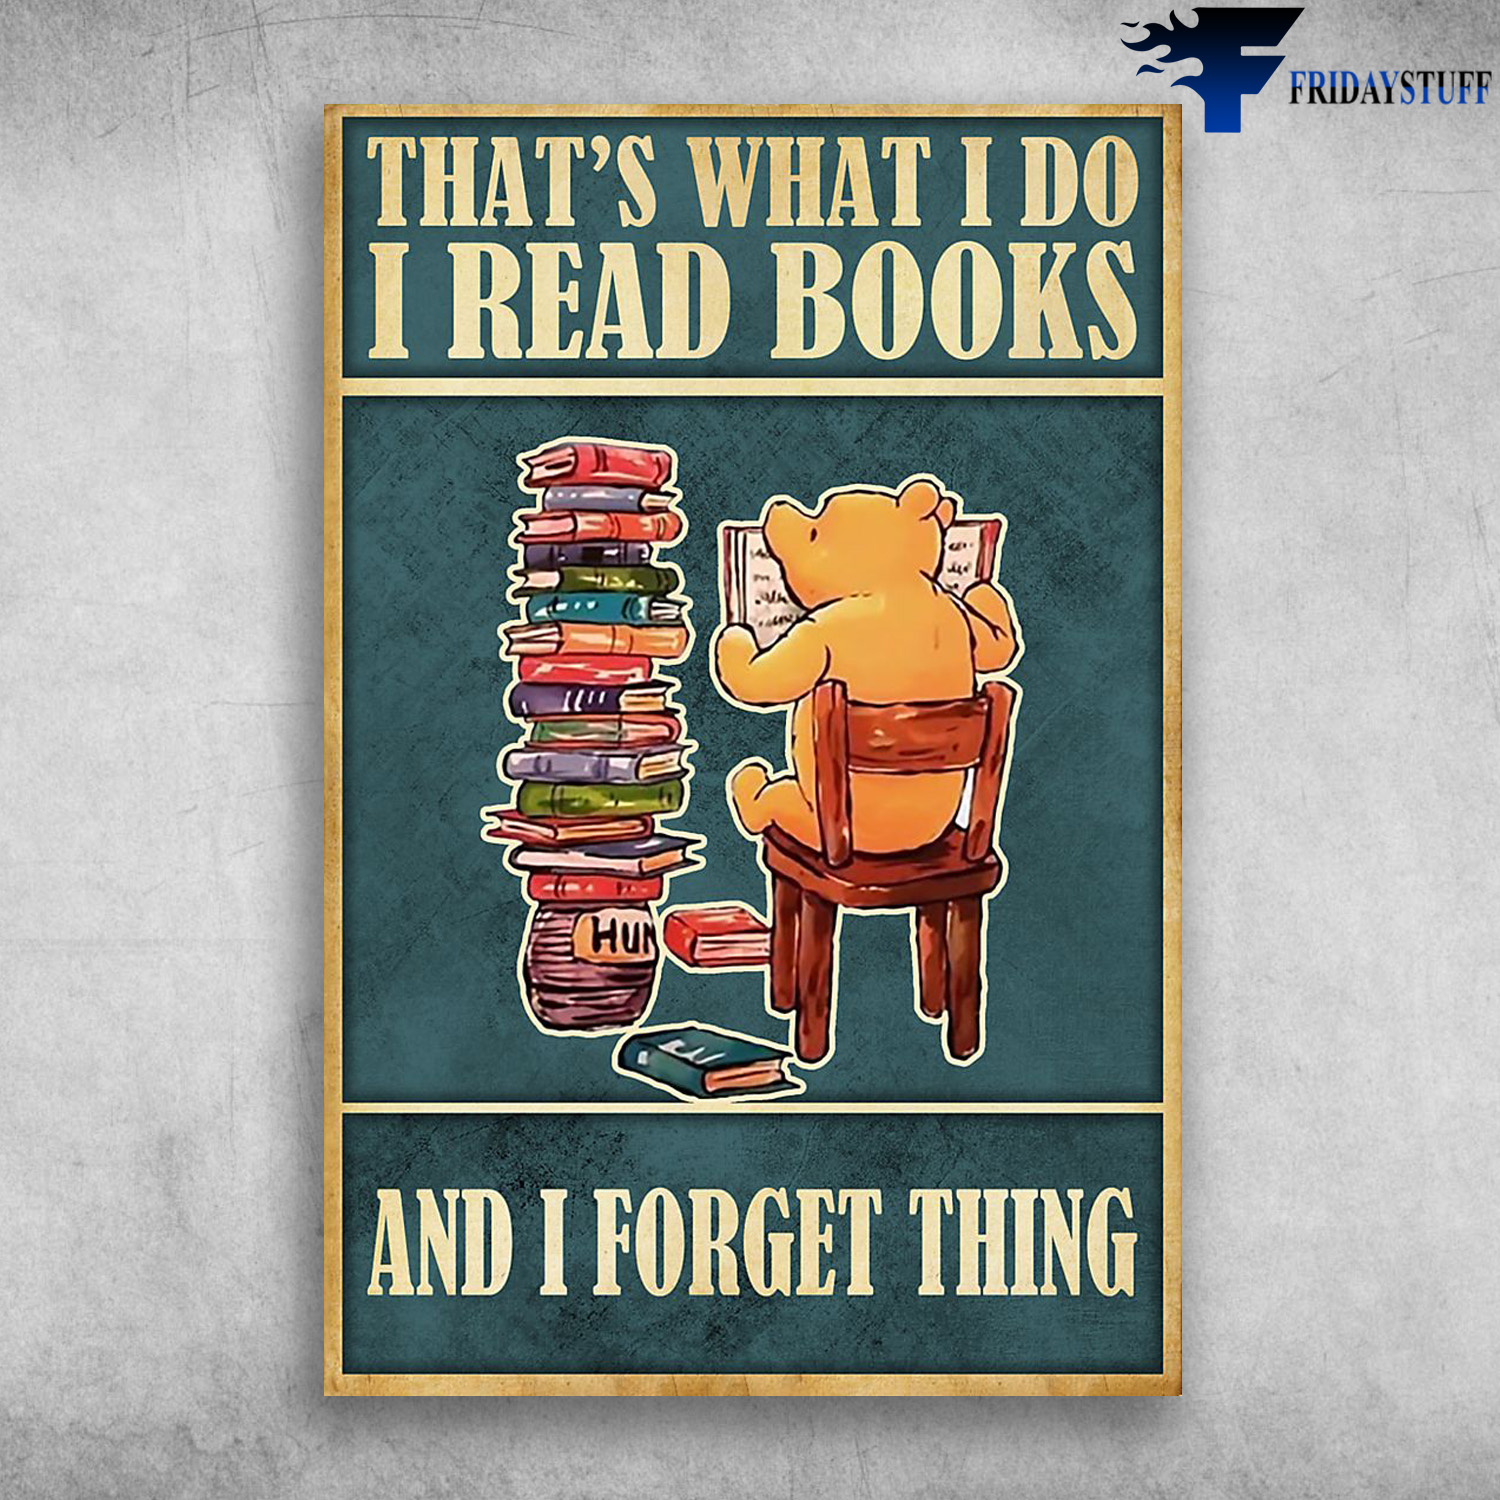 Pooh Bear Reading Book - That's What I Do, I Read Books, And I Forget Thing